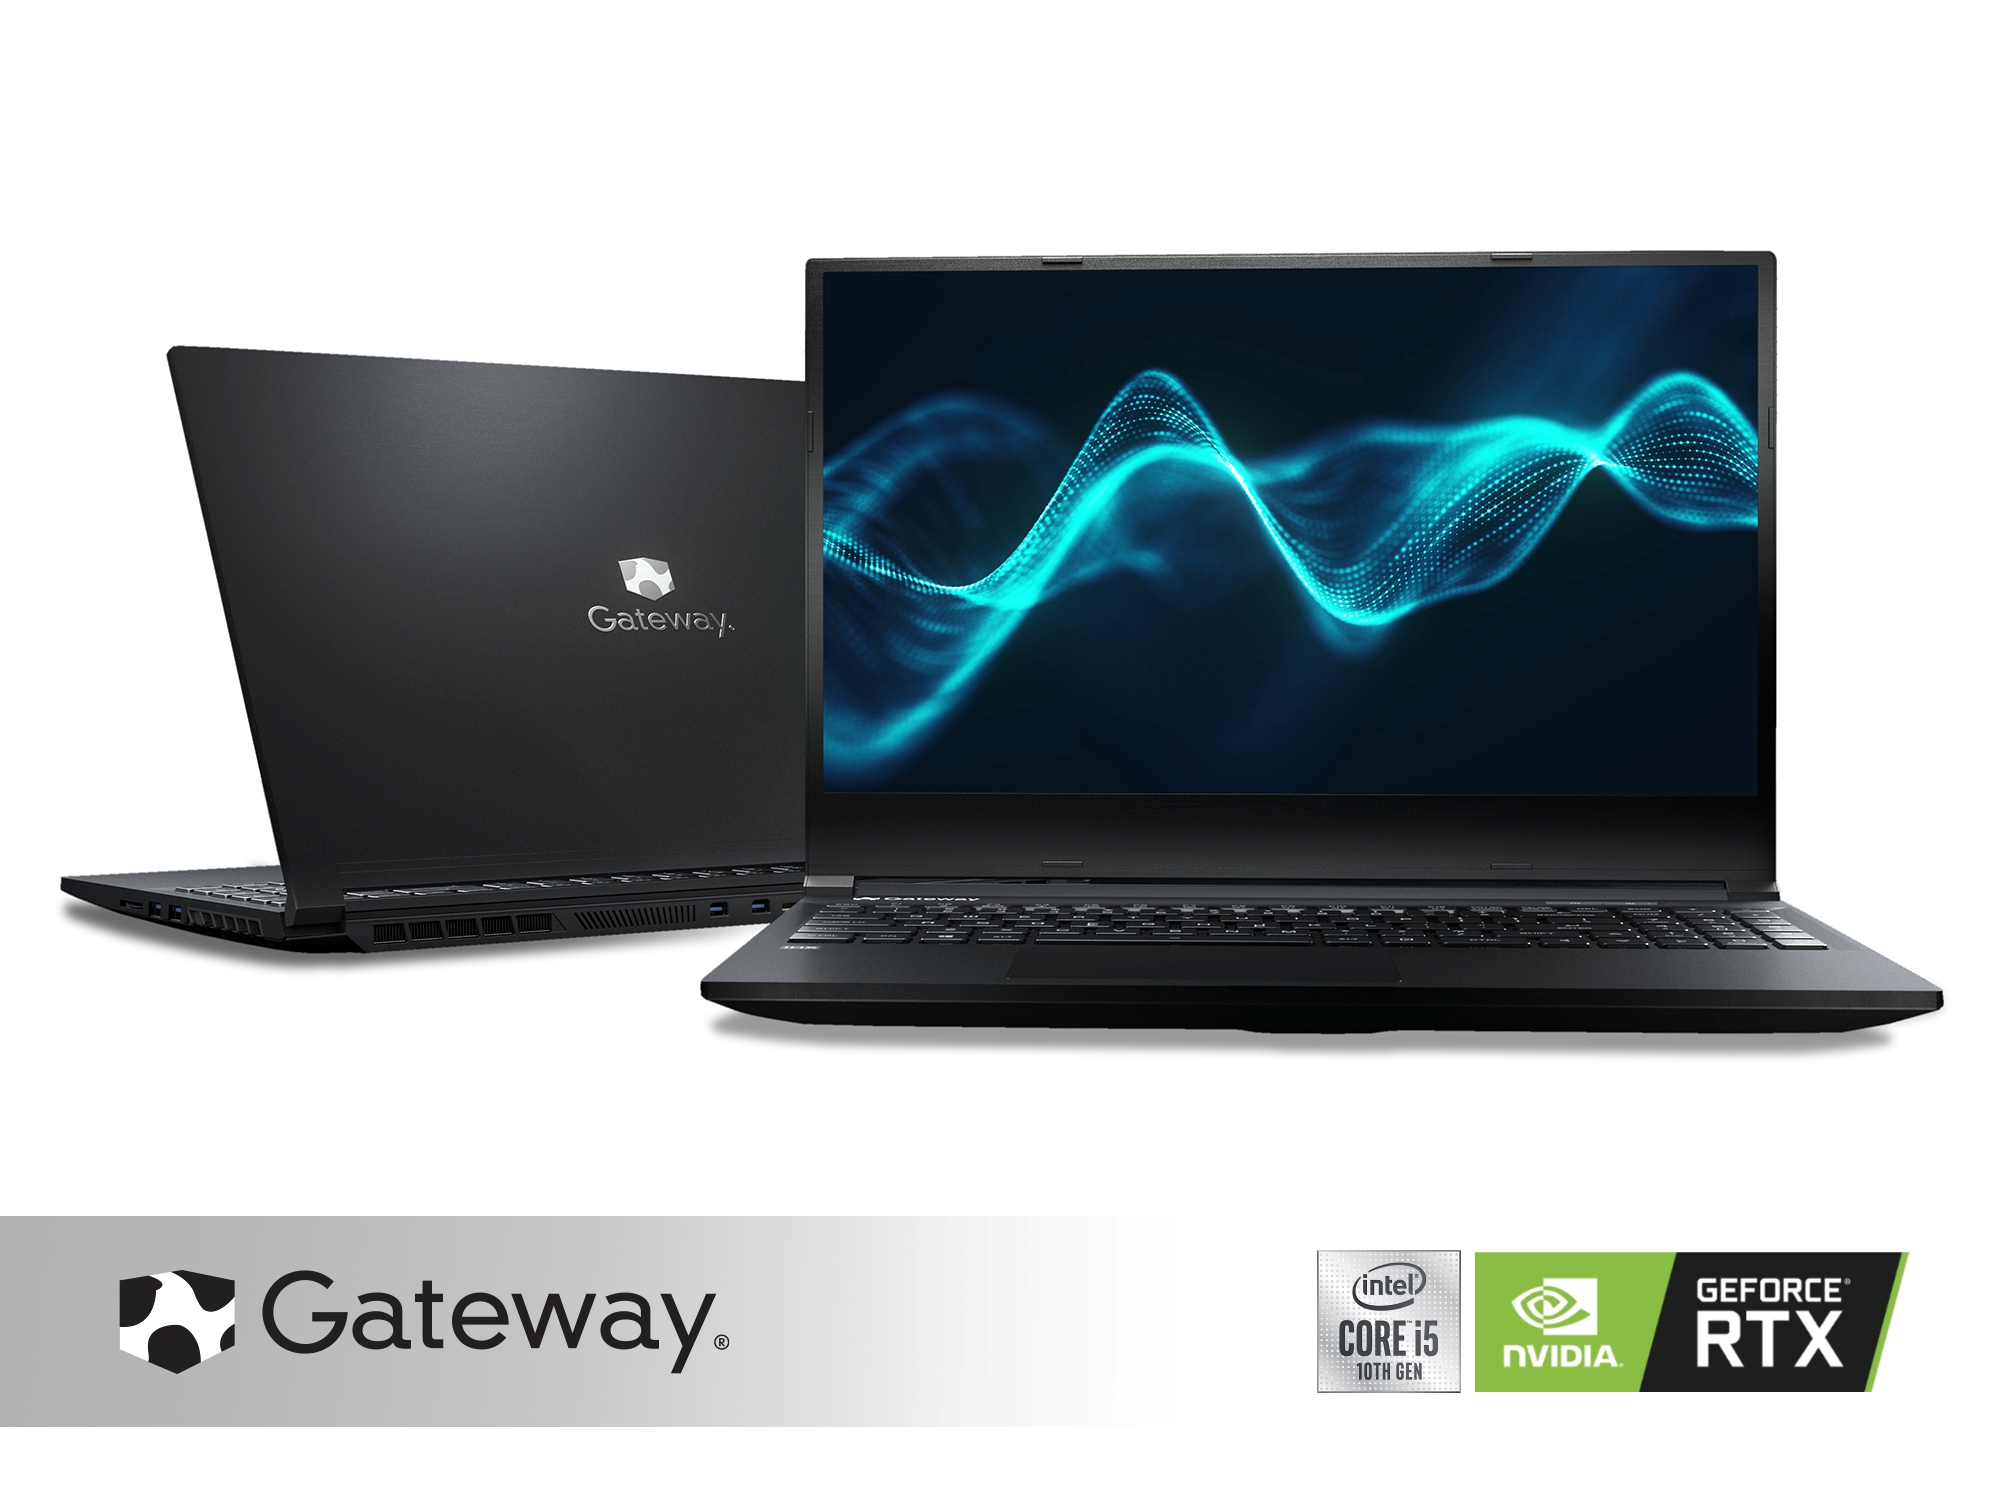 This GeForce RTX 2060 laptop is now only $ 699 from Walmart and Gateway